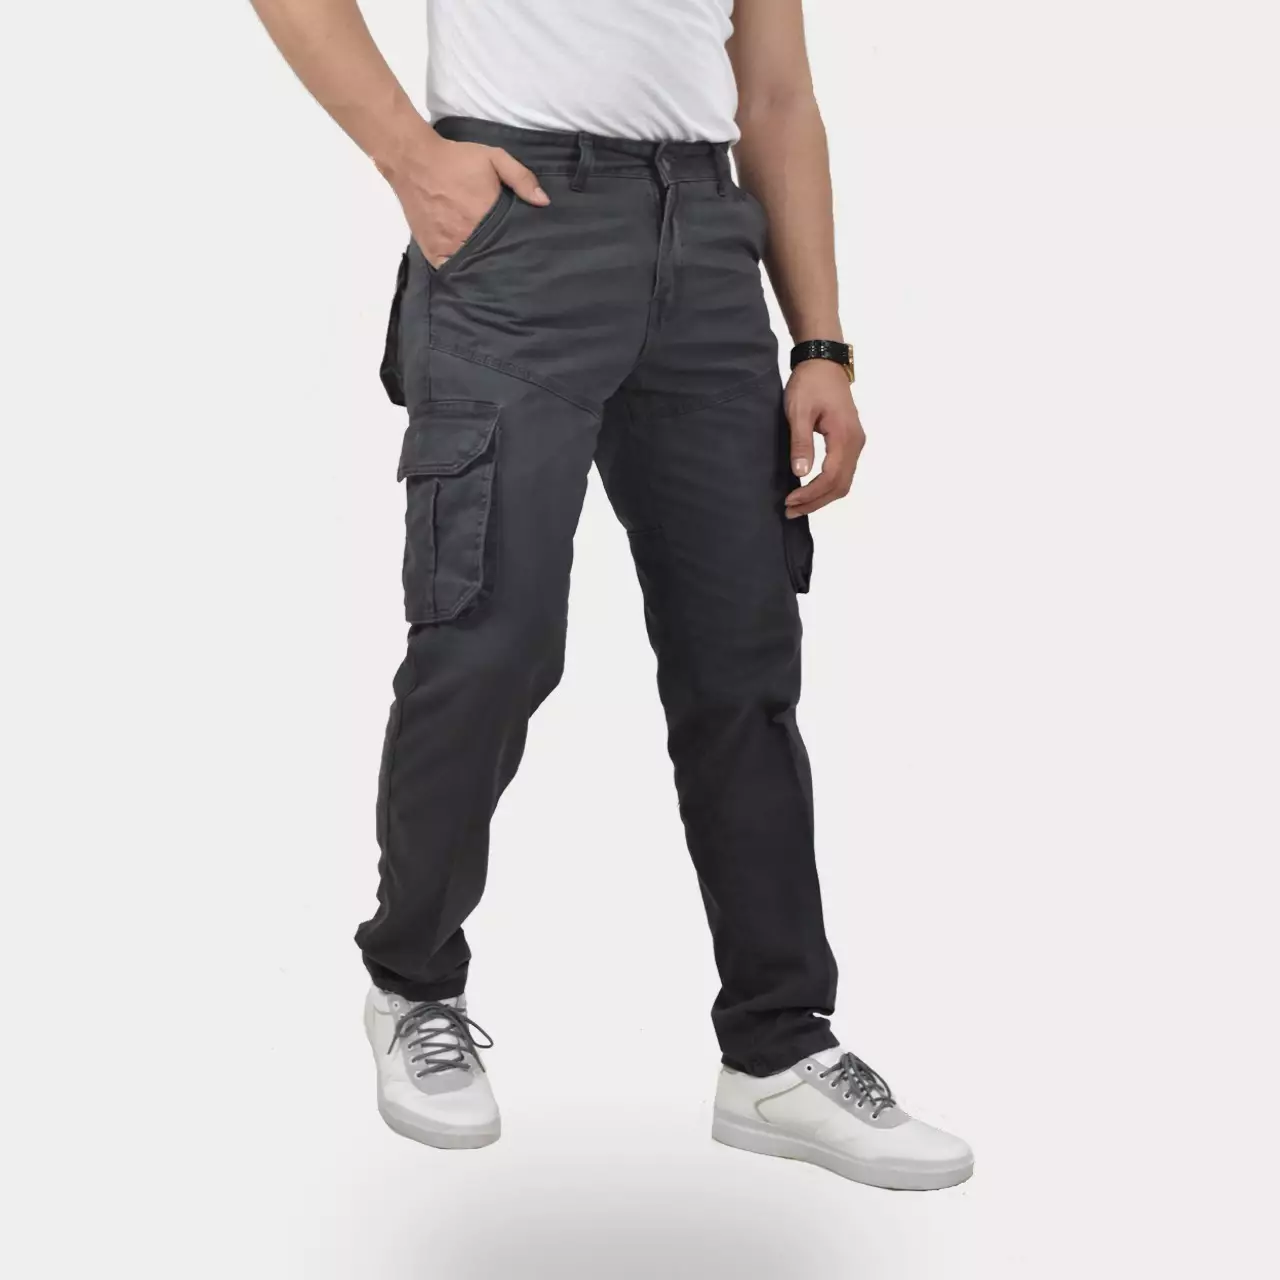 Women's FLEX Relaxed Fit Work Pants, 46% OFF